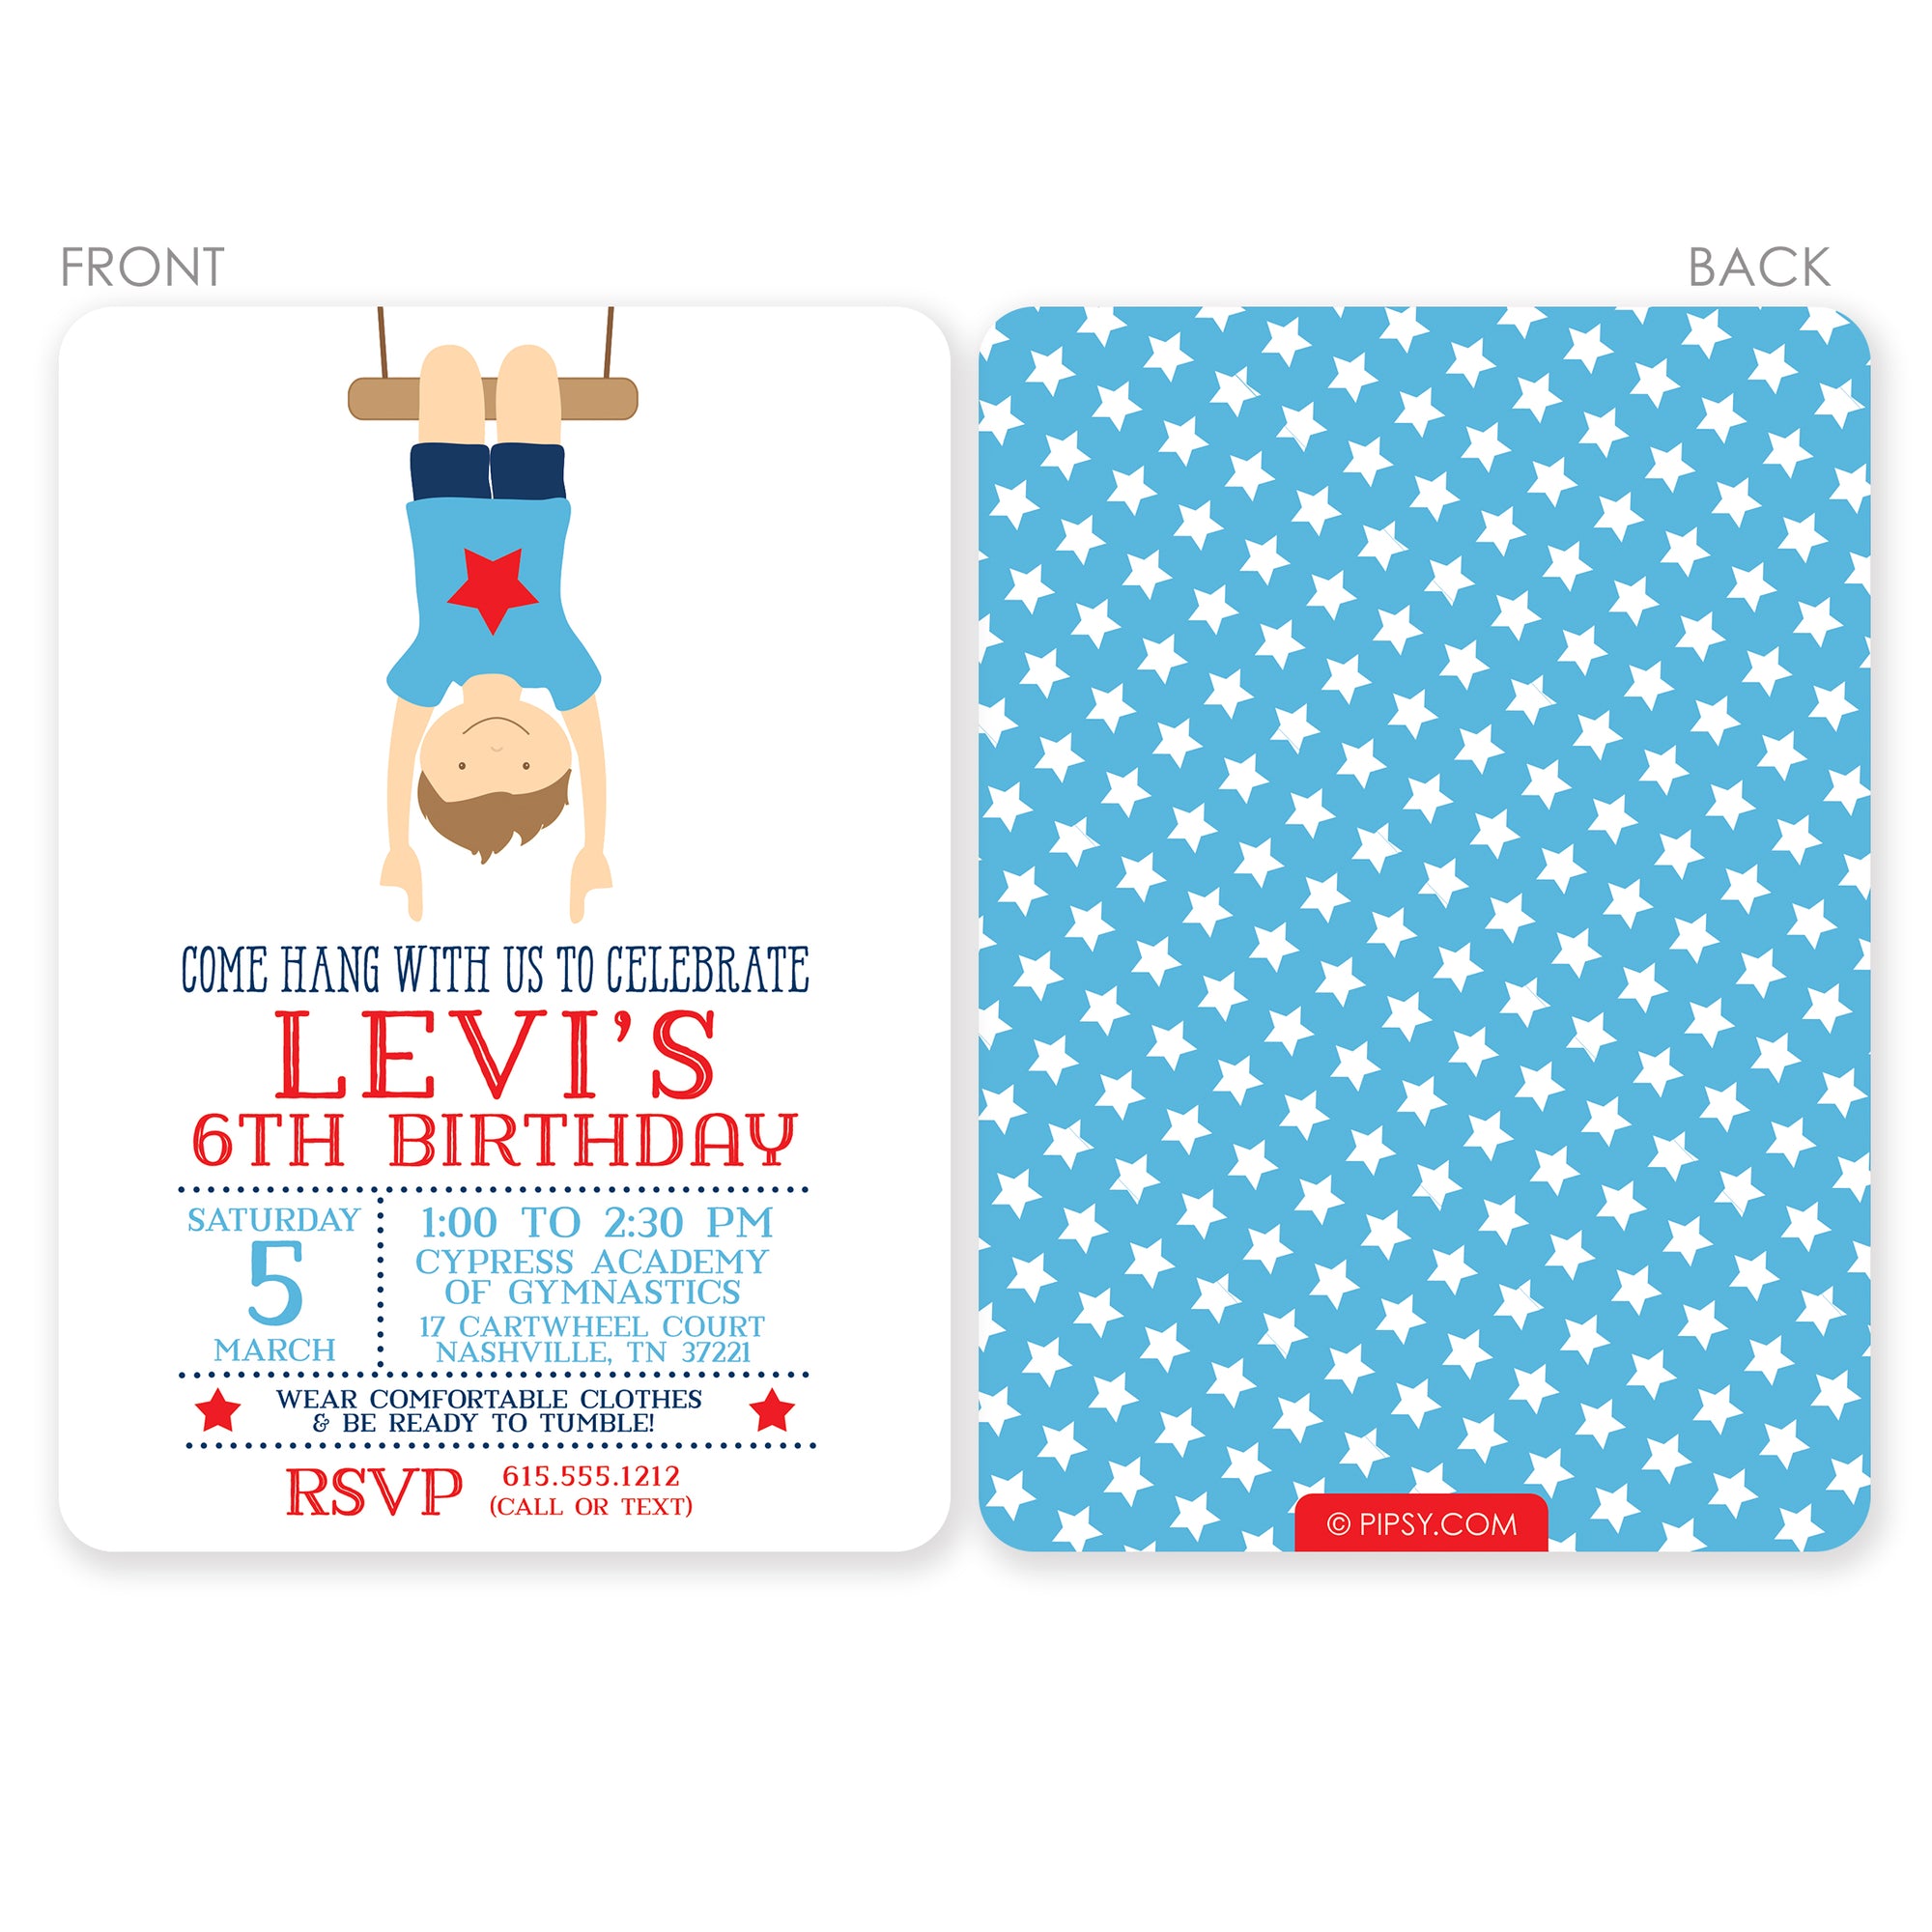 Gymnastics Boy Birthday Invitation, Printed on premium heavyweight cardstock, illustration can be made to look like your child, from Pipsy.com